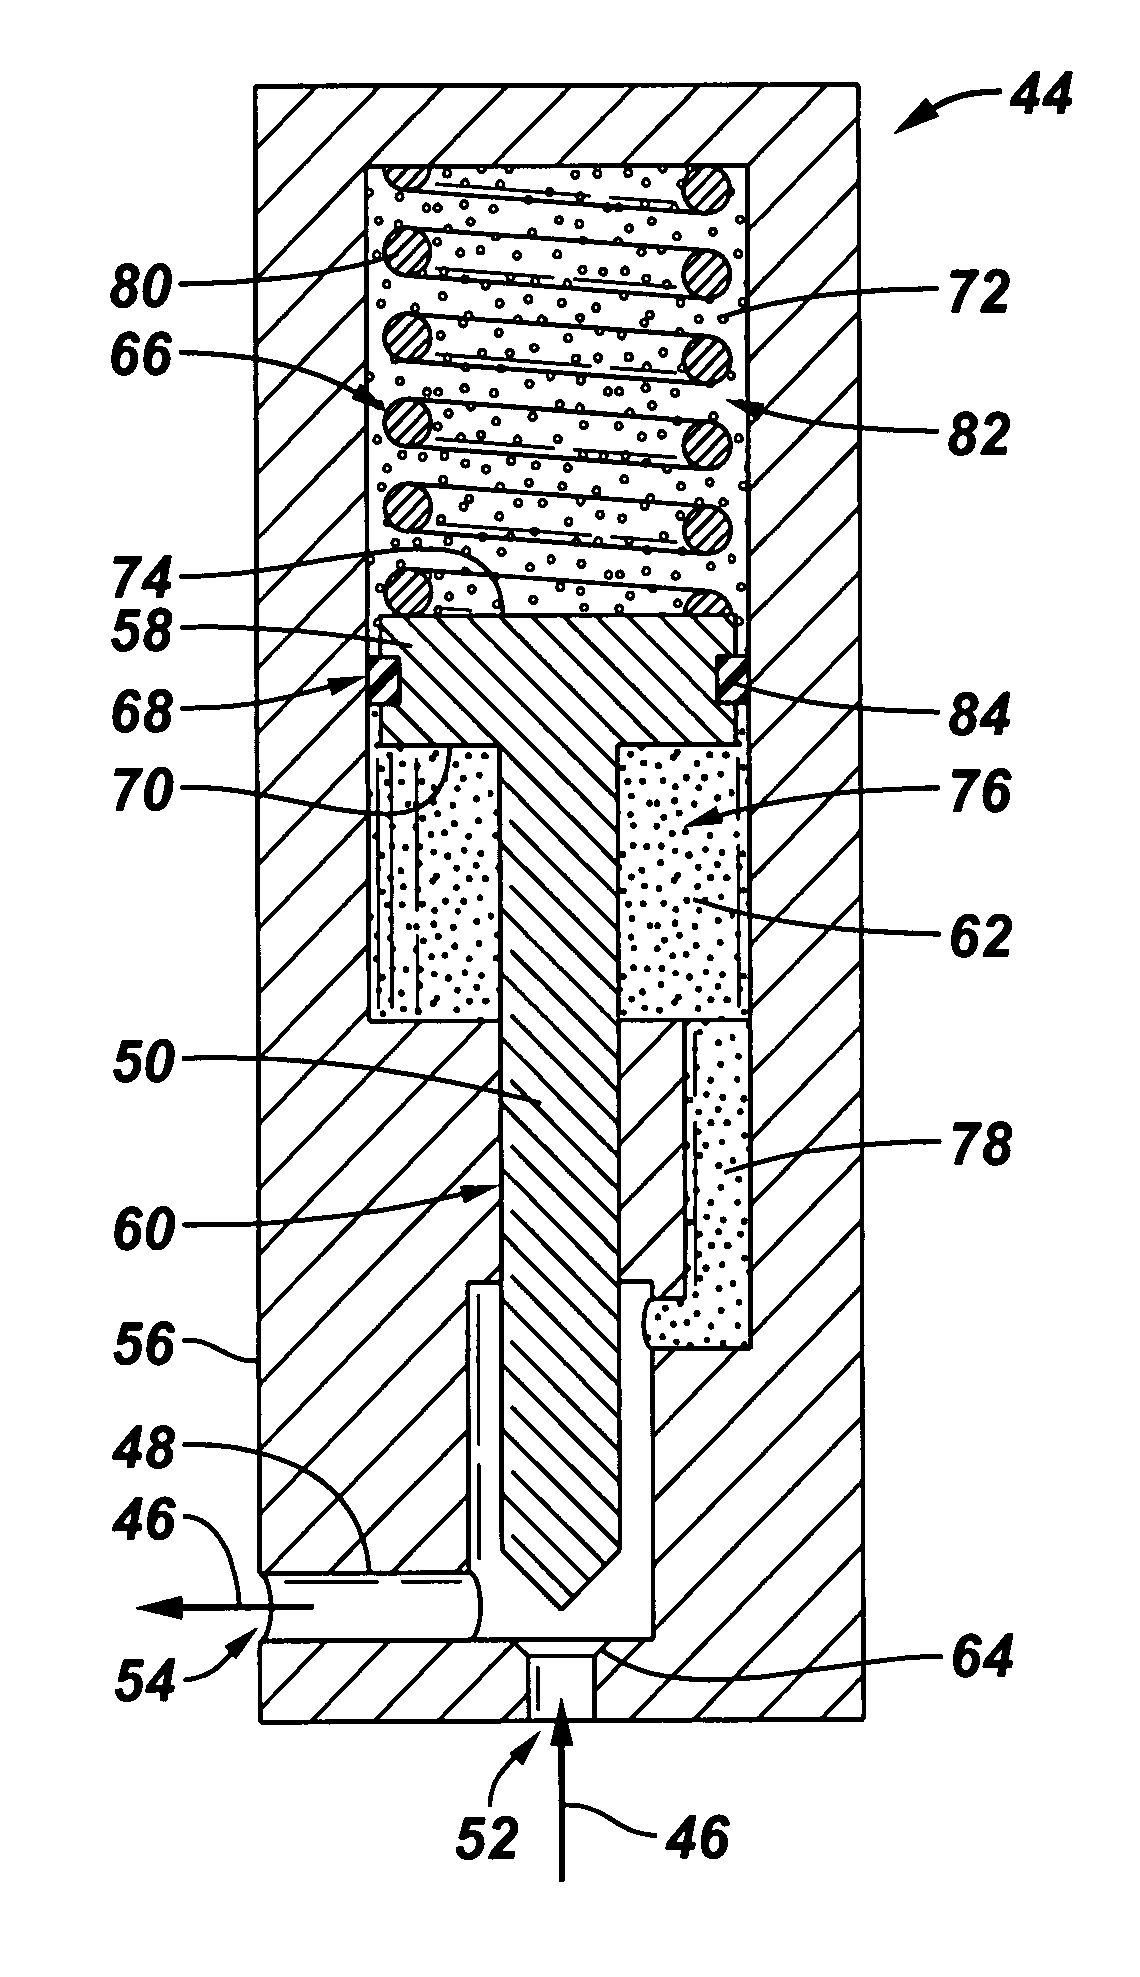 System and method for gas shut off in a subterranean well